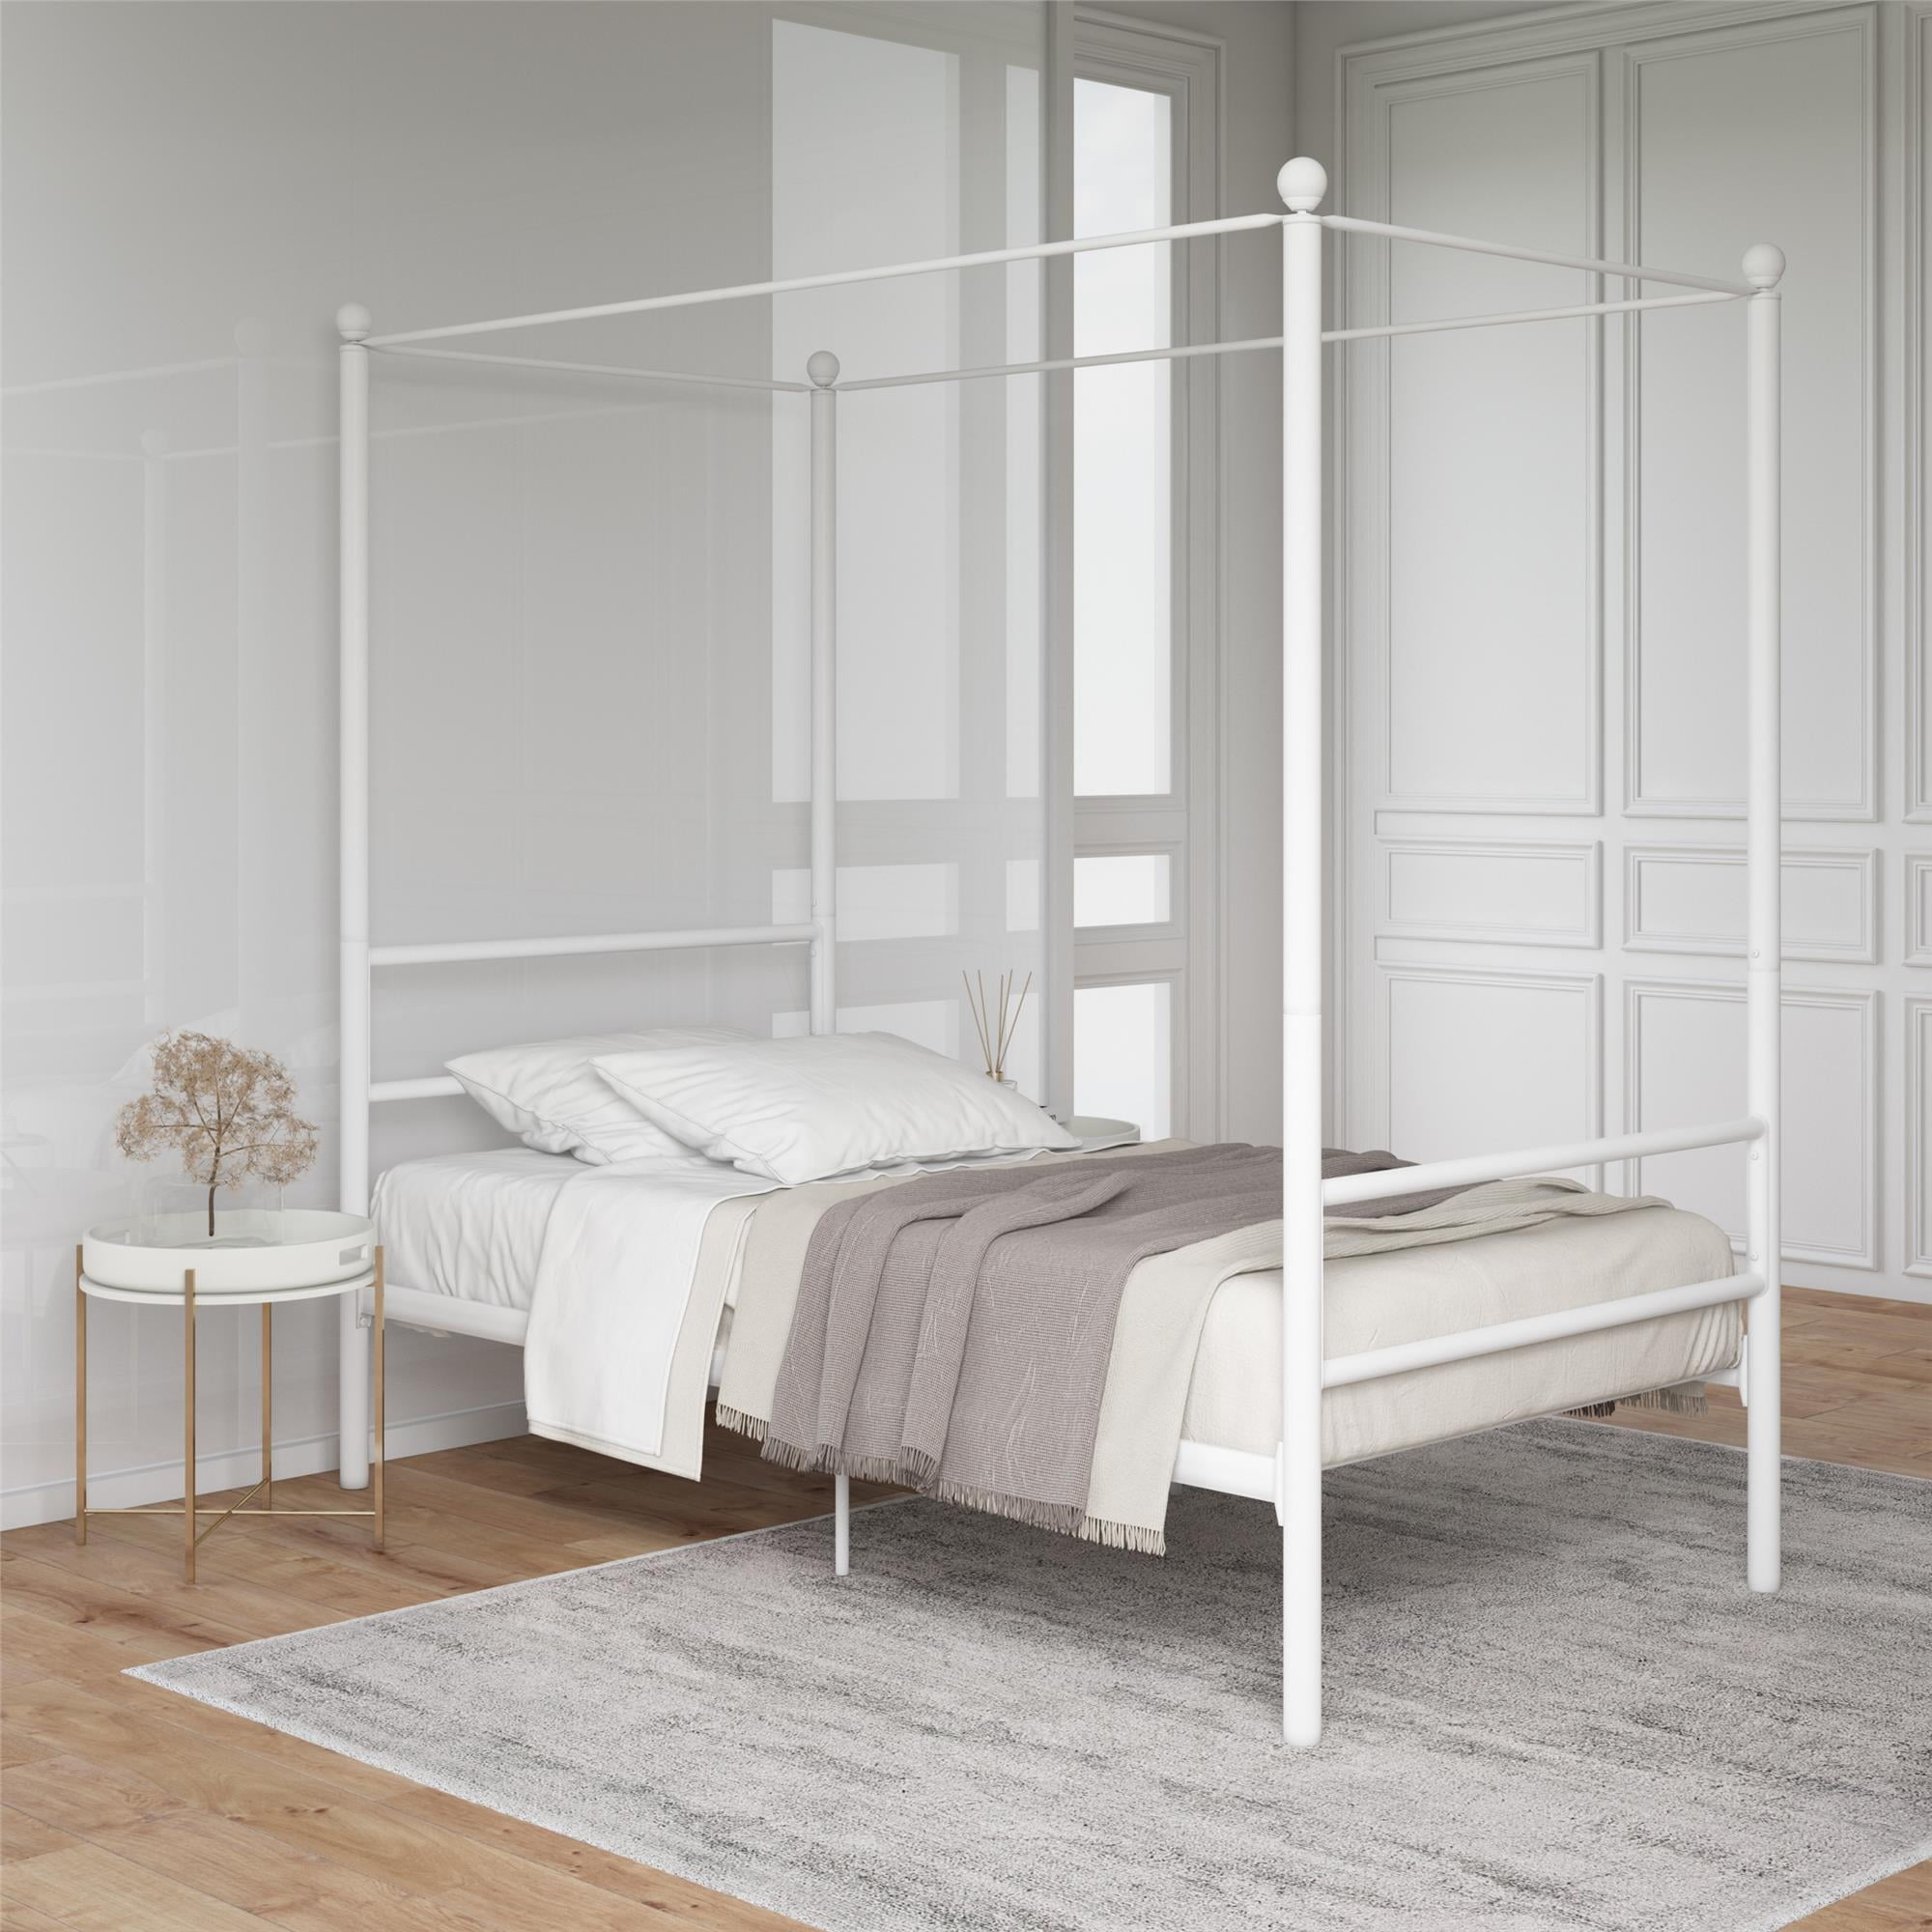 Mainstays Metal Canopy Bed Twin, Twin Wood Canopy Bed